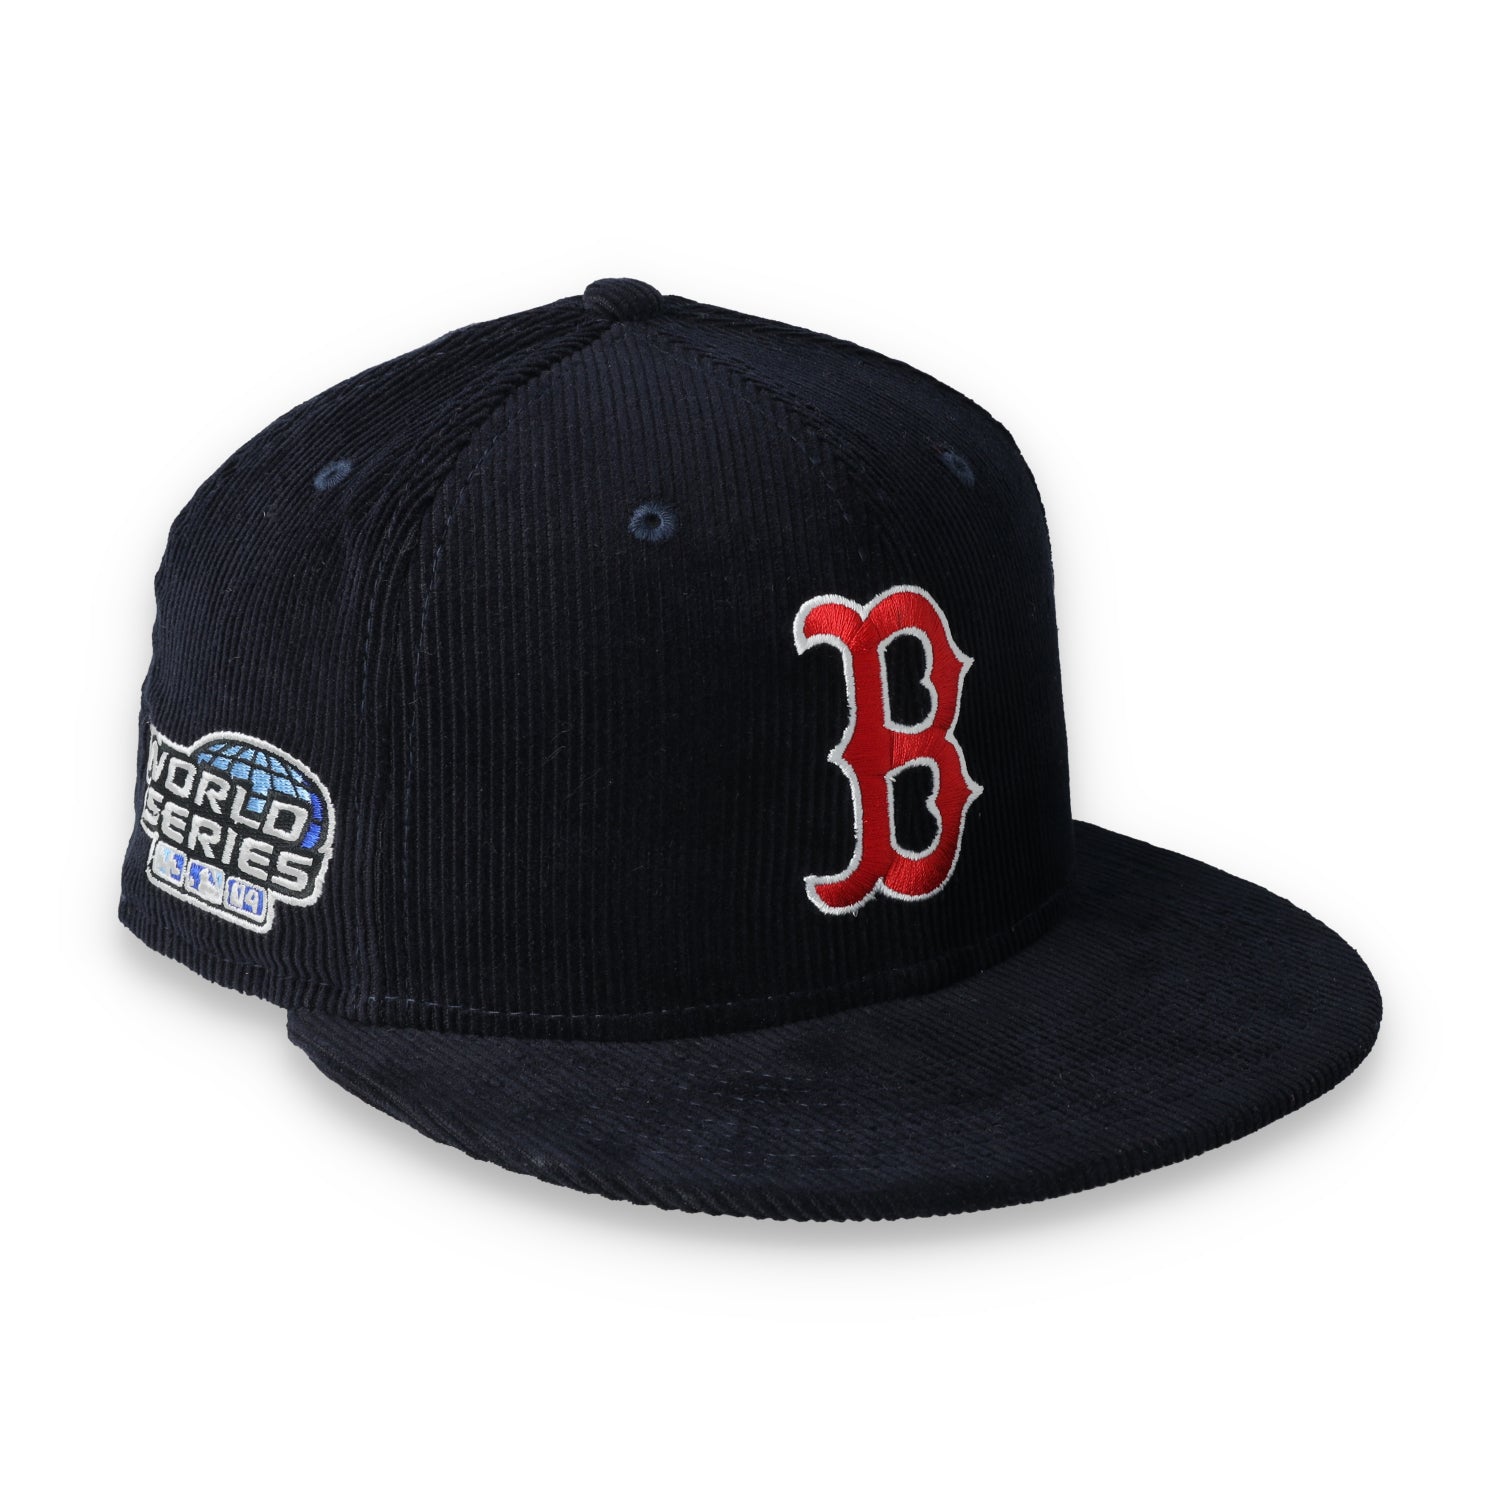 New Era Boston Red Sox Side Patch Corduroy Fitted Hat-Navy Blue